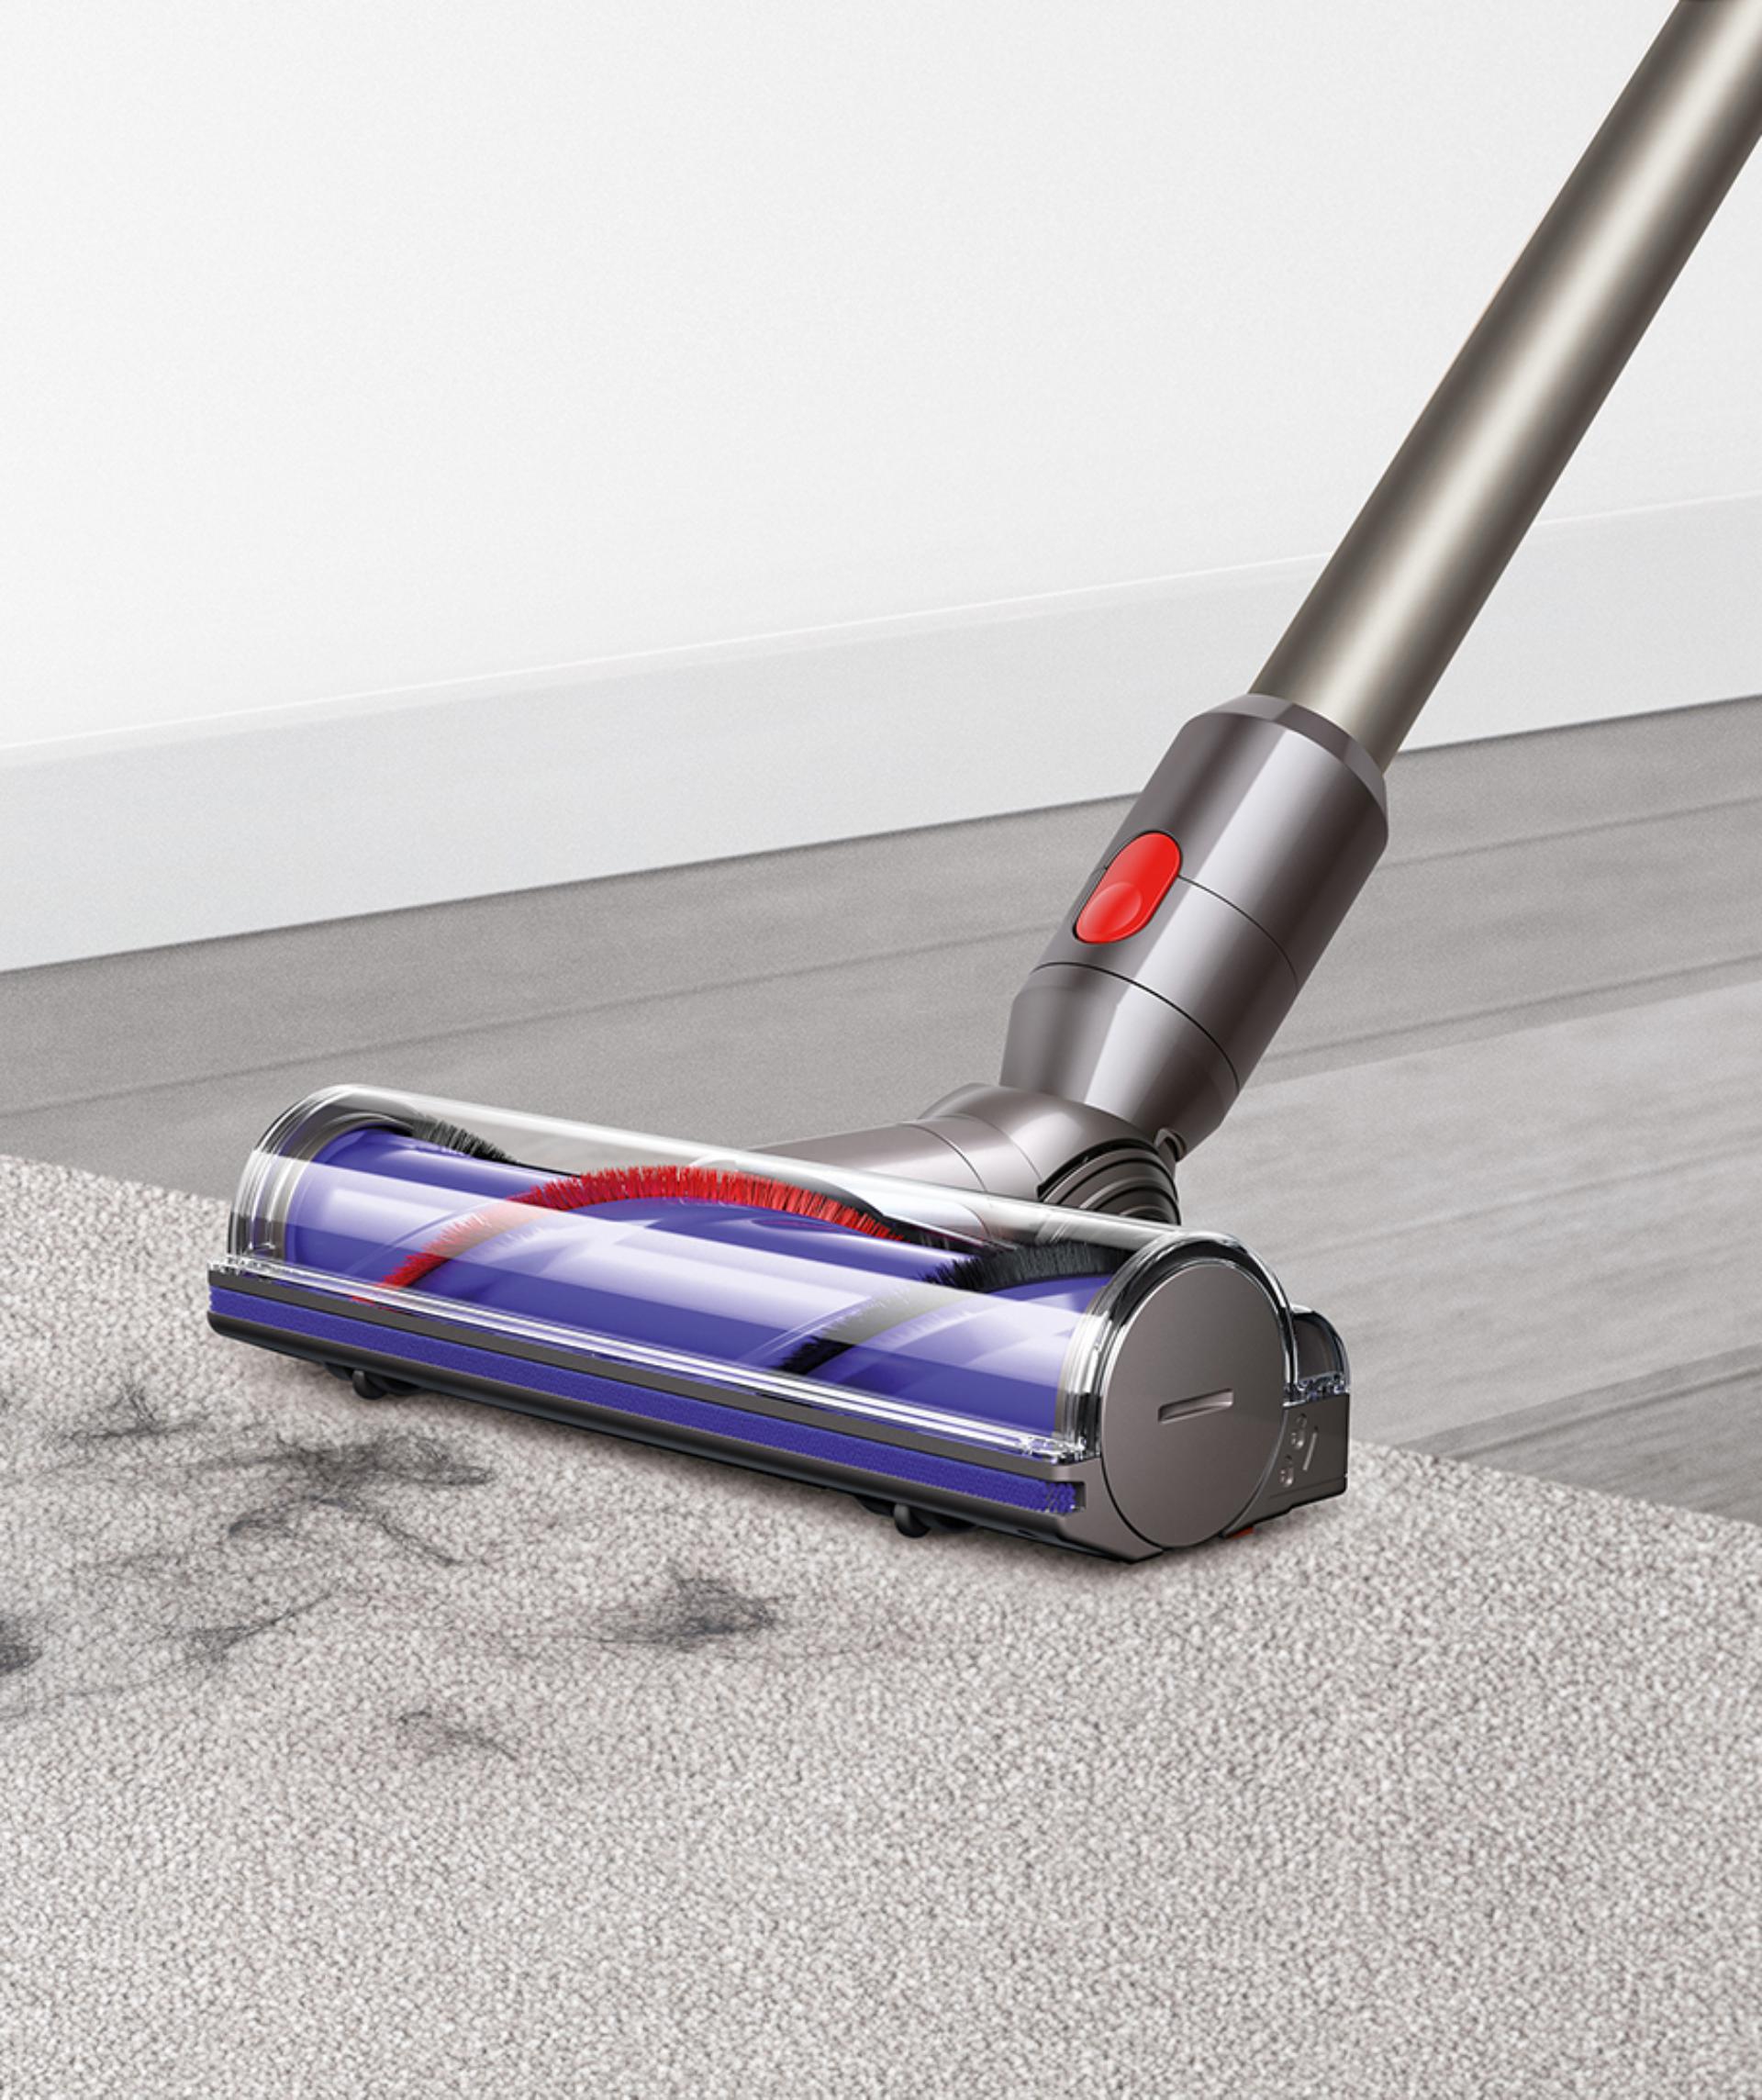 Dyson V8 Animal with direct drive cleanerhead